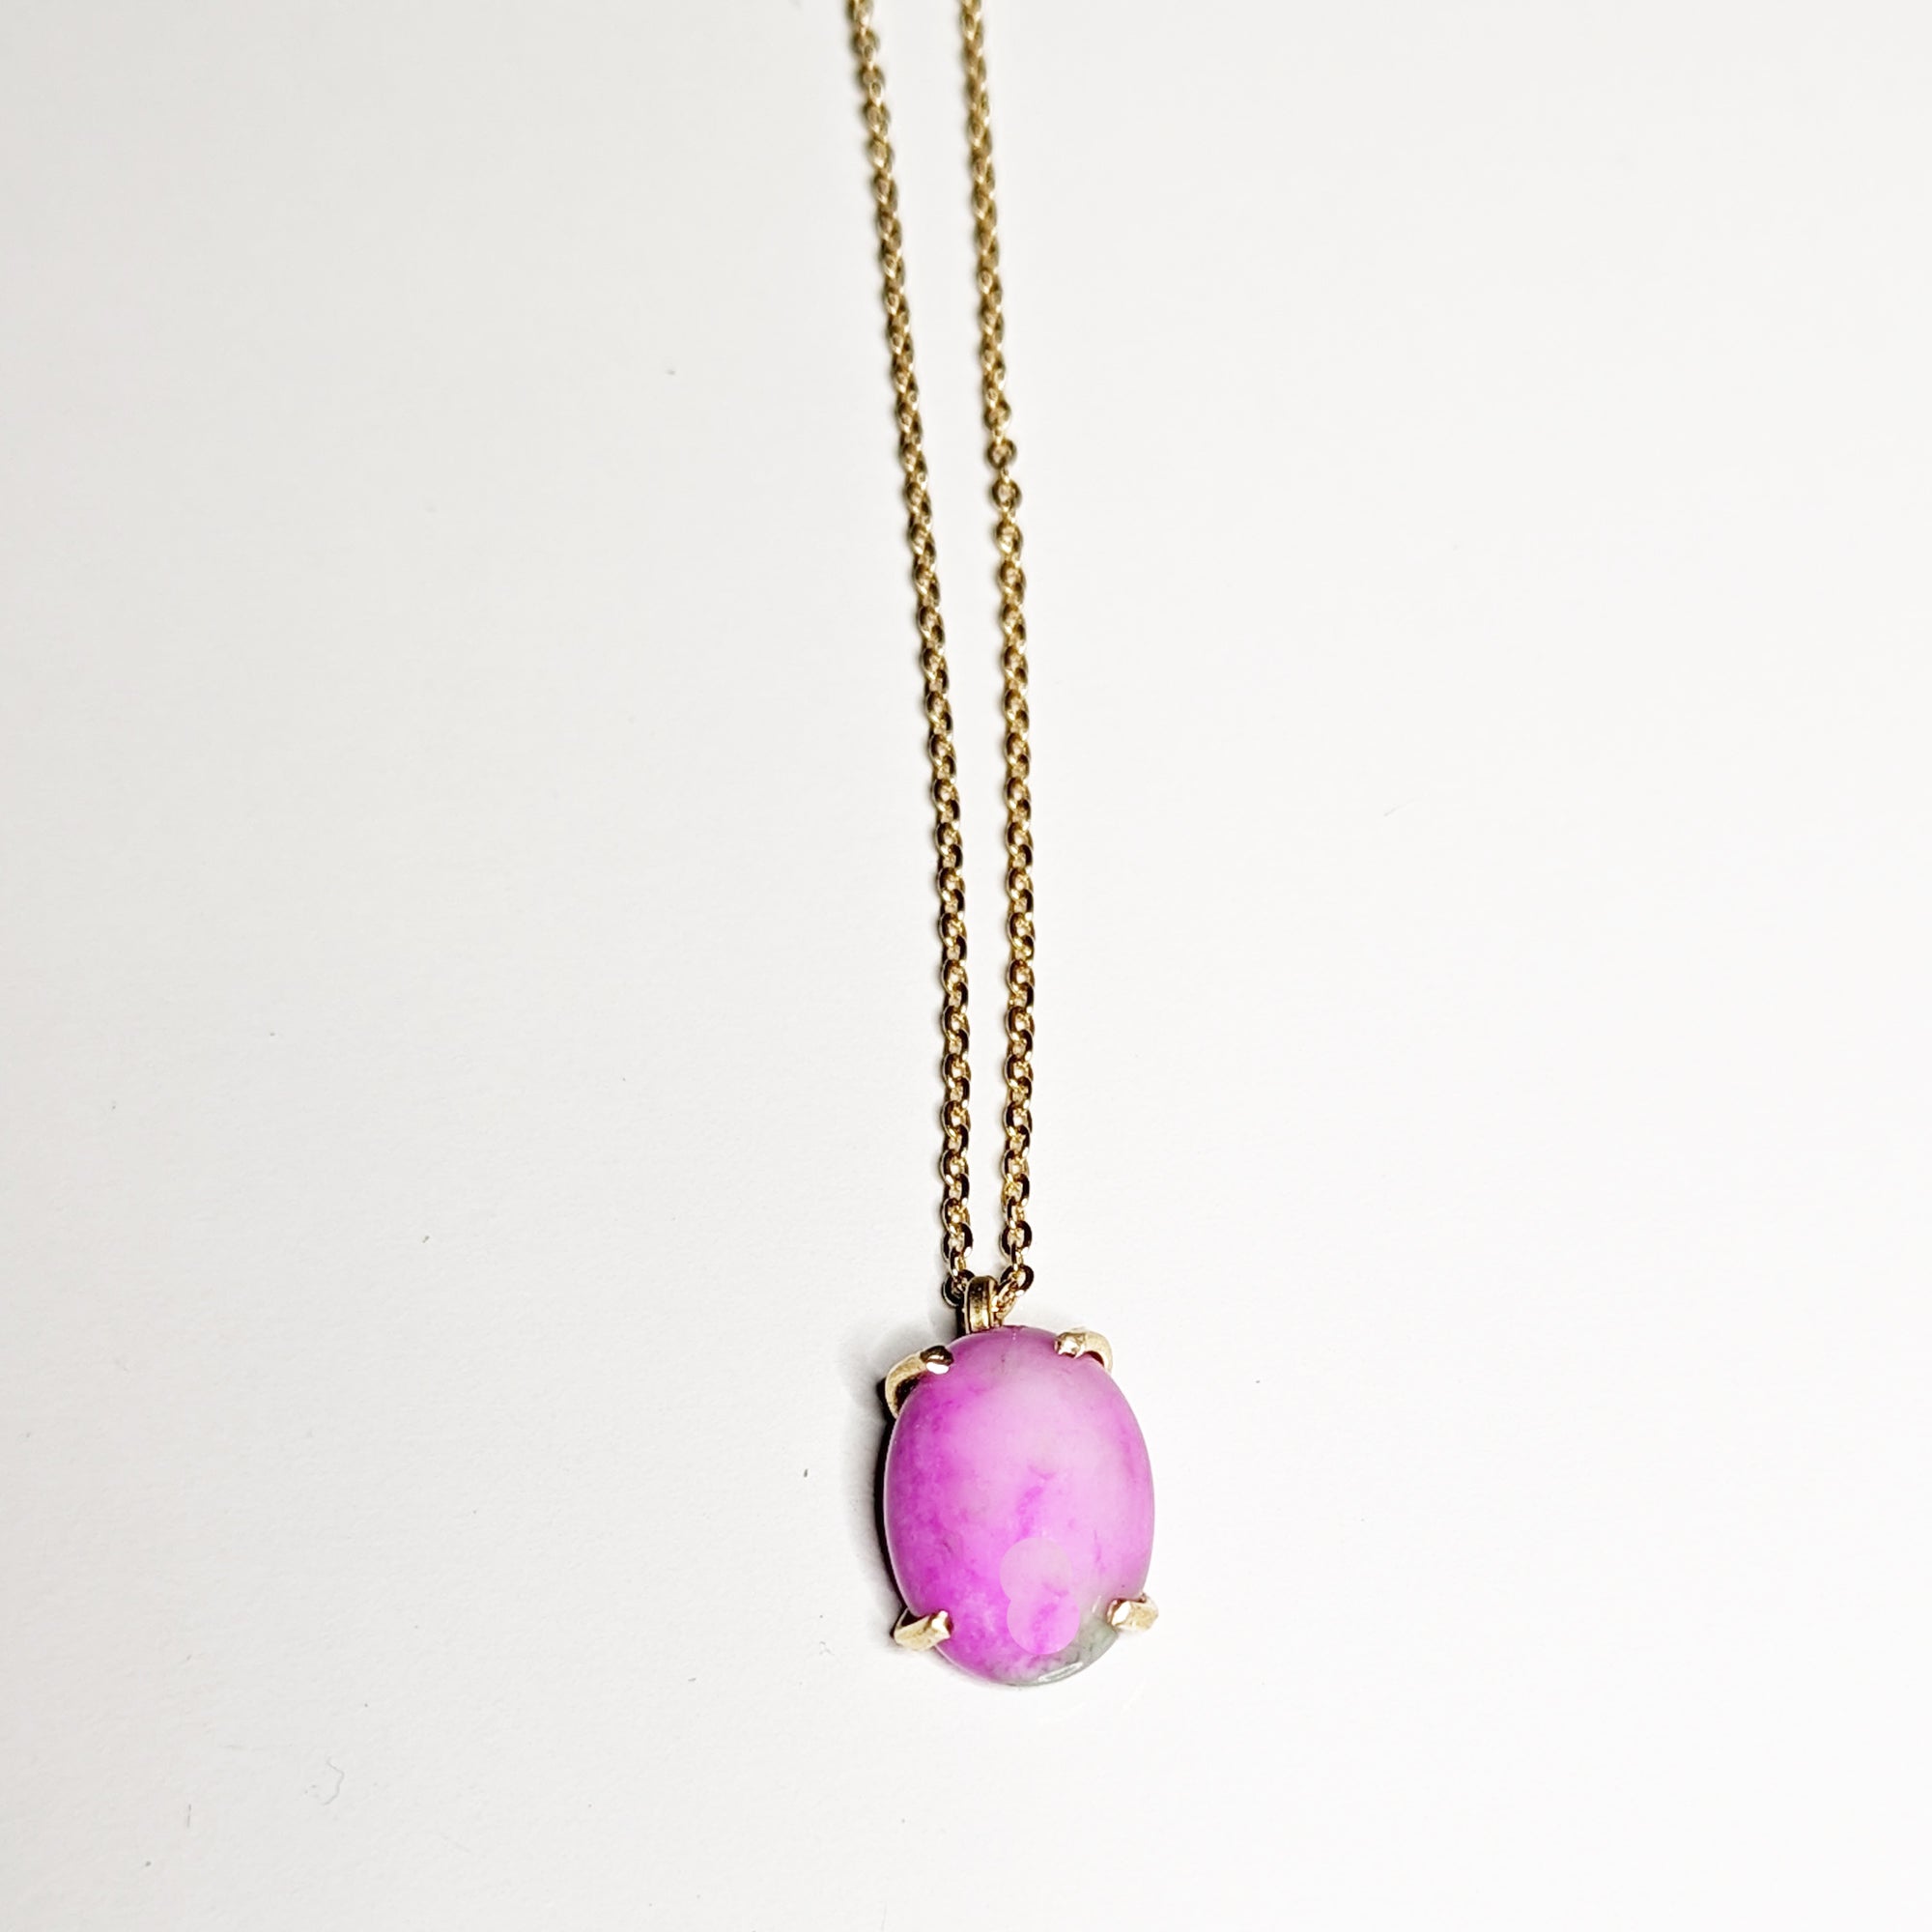 The Pink Jewel Necklace